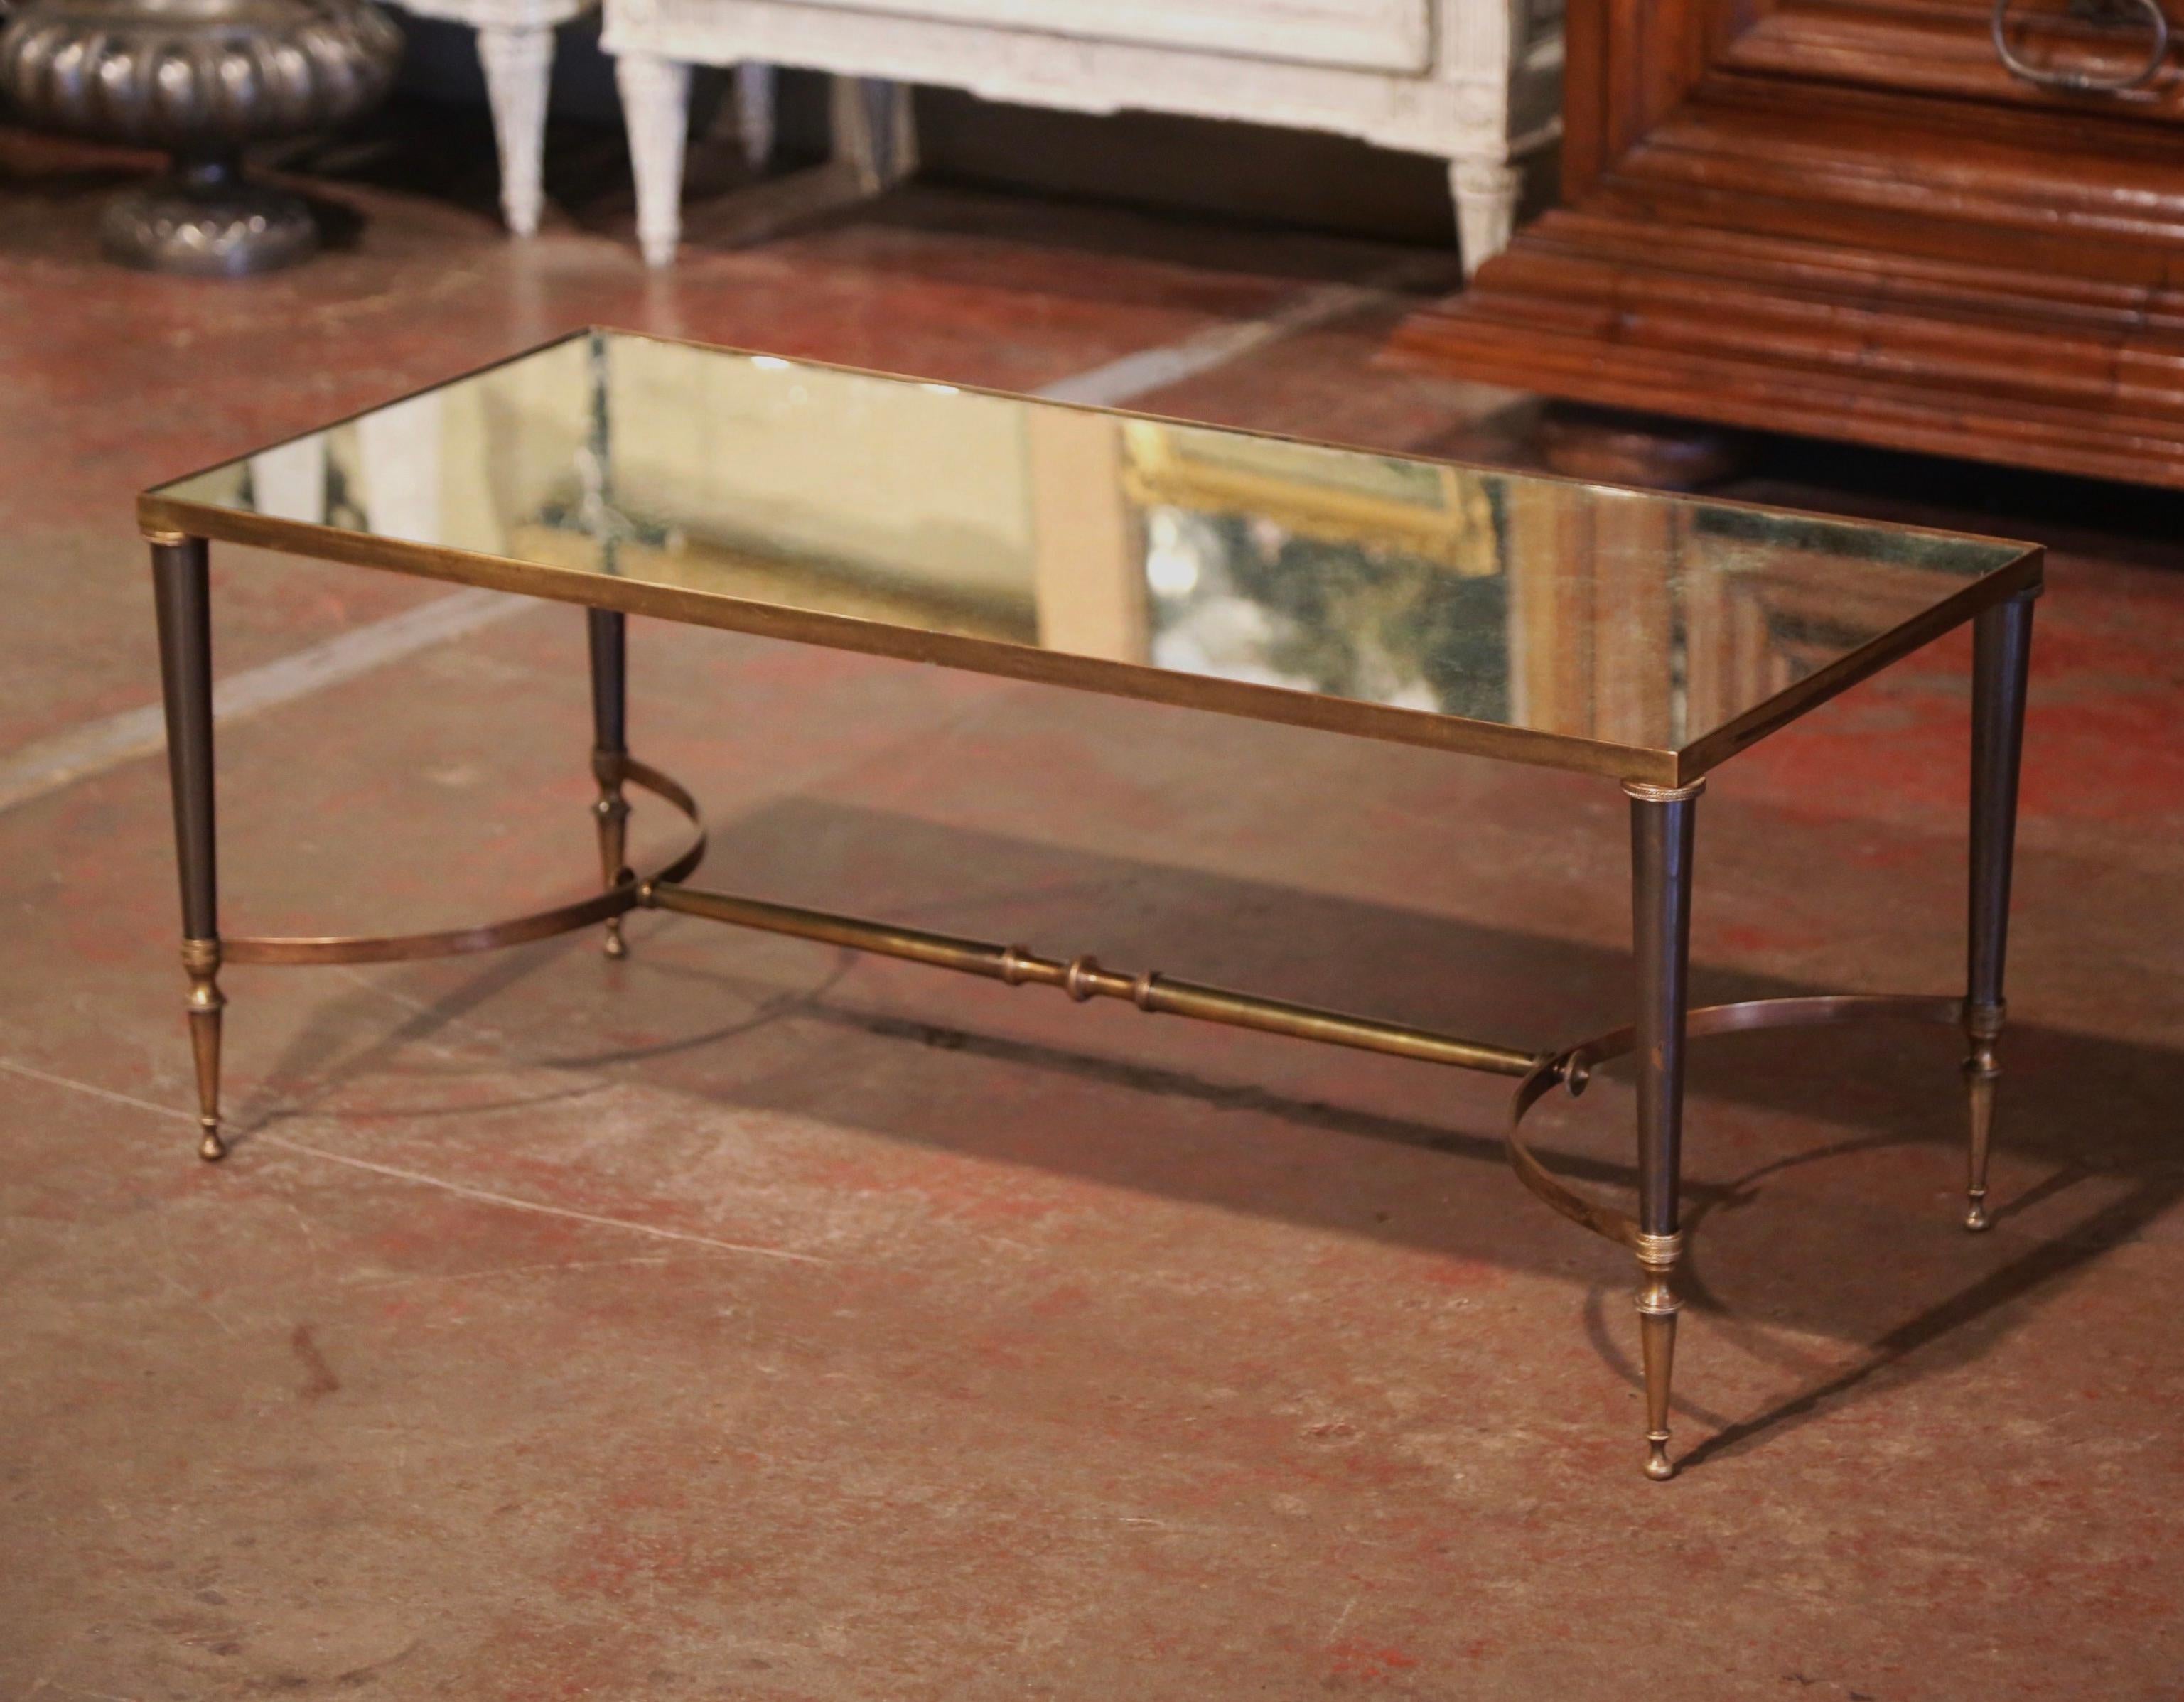 Hand-Crafted Mid-Century French Bronze Dore Mirrored Coffee Table from Maison Baguès